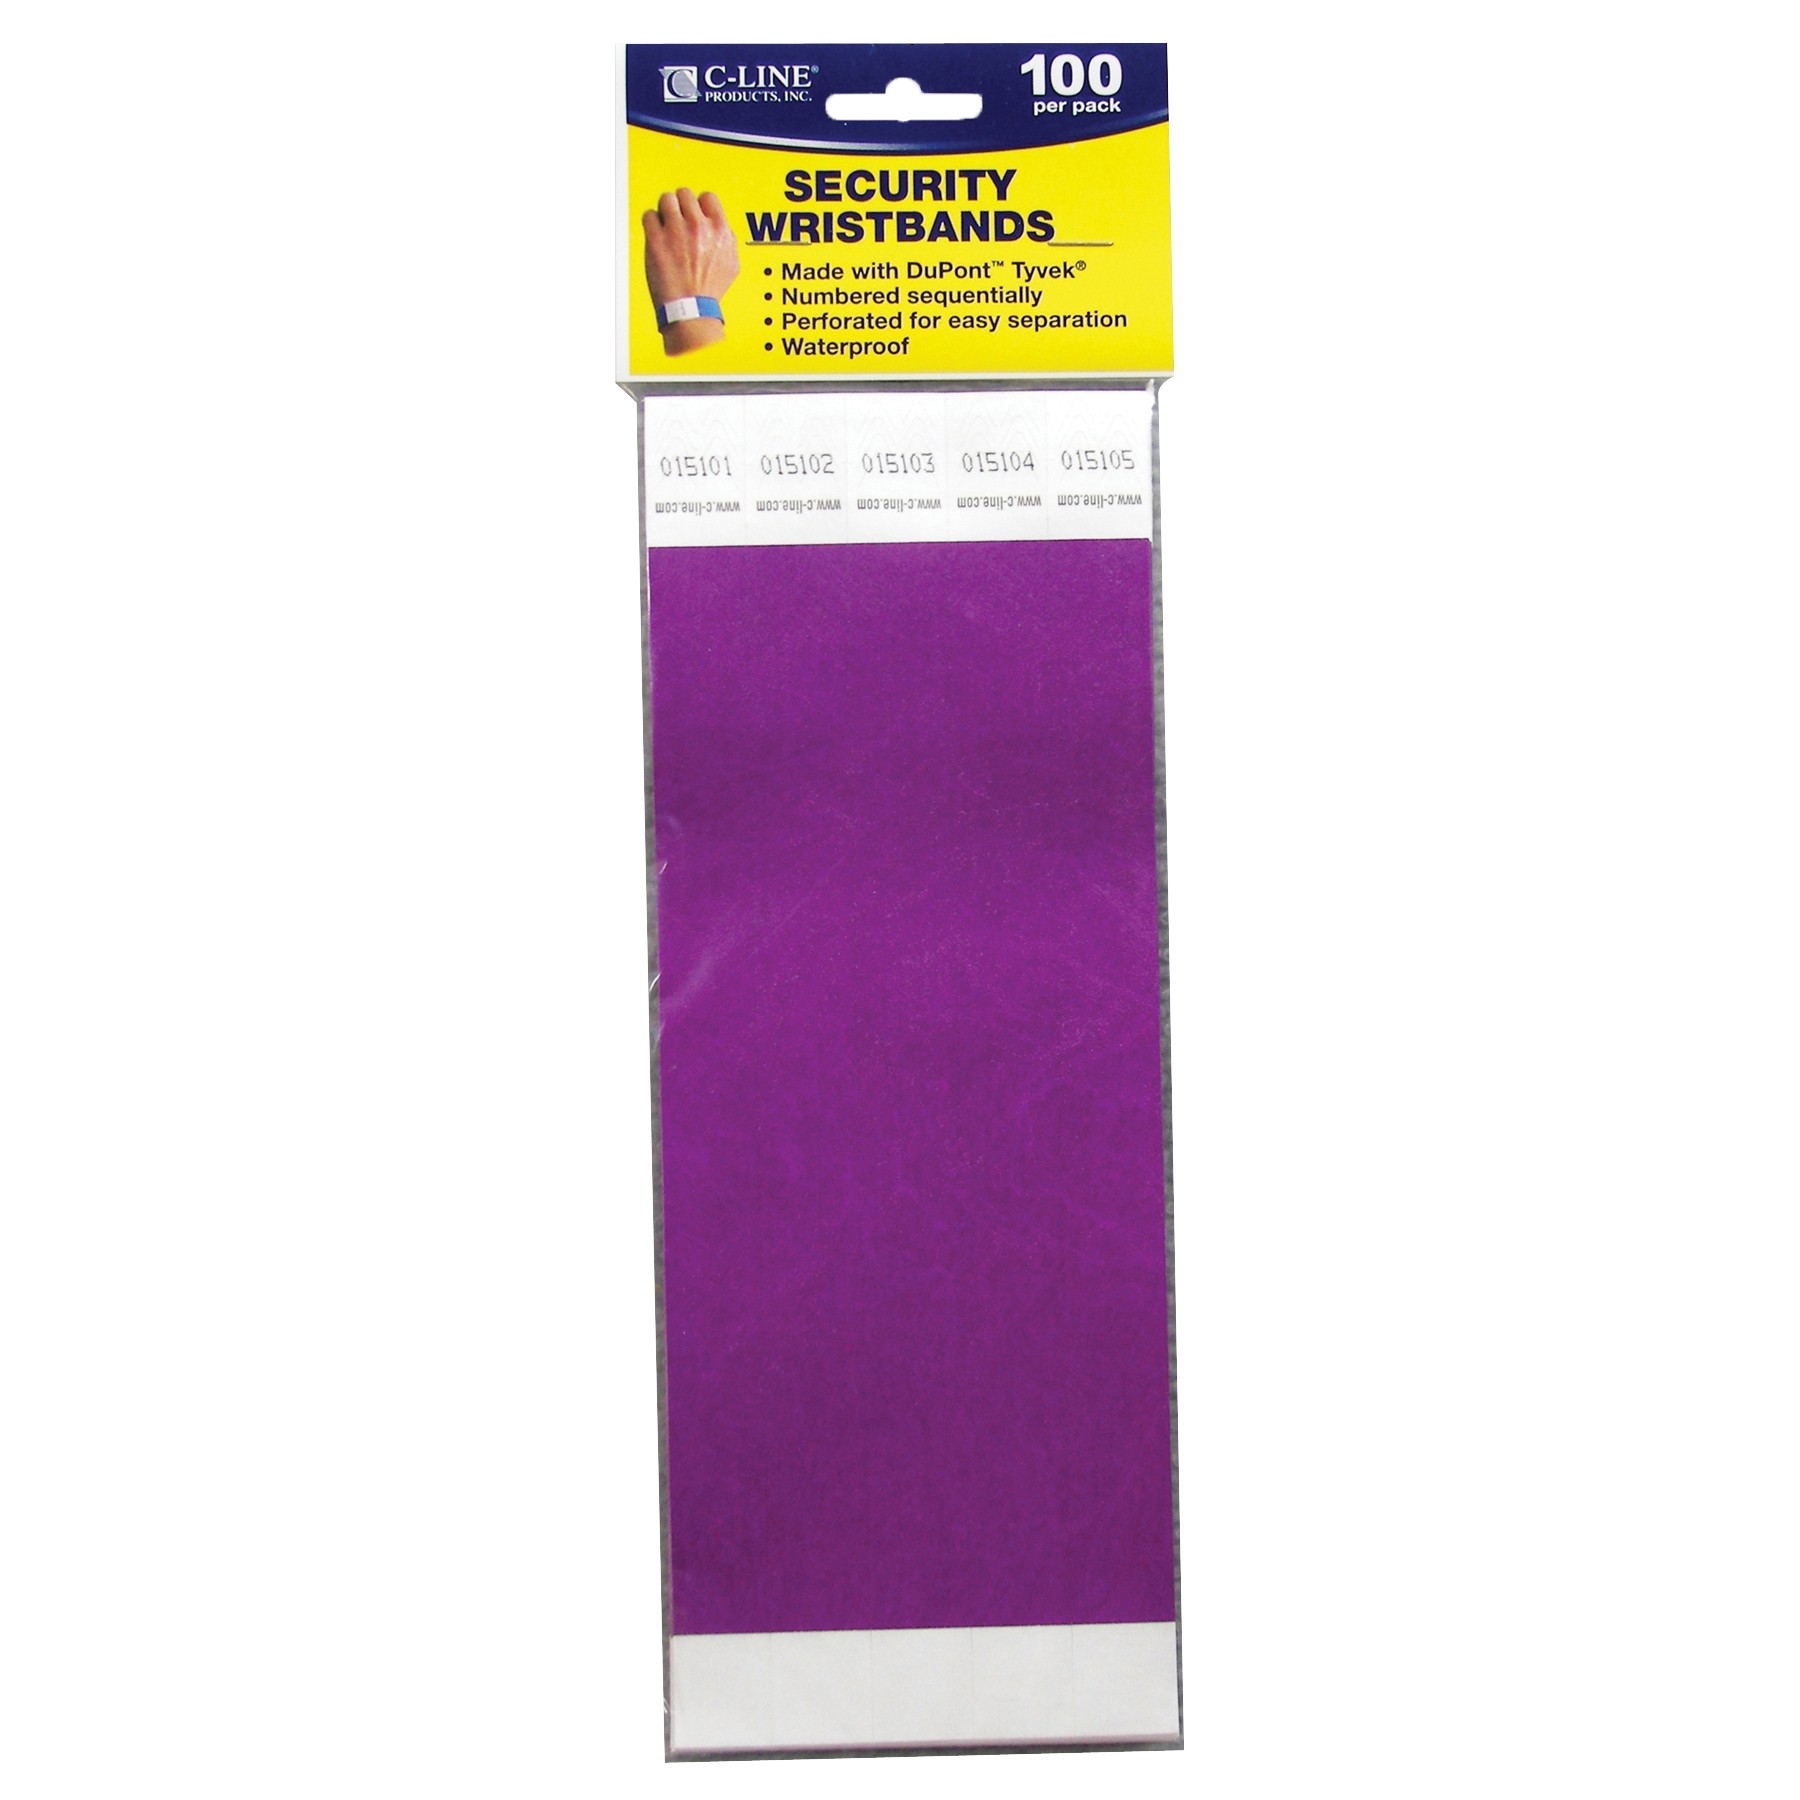 DuPont Tyvek Security Wristbands, Purple, Pack of 100